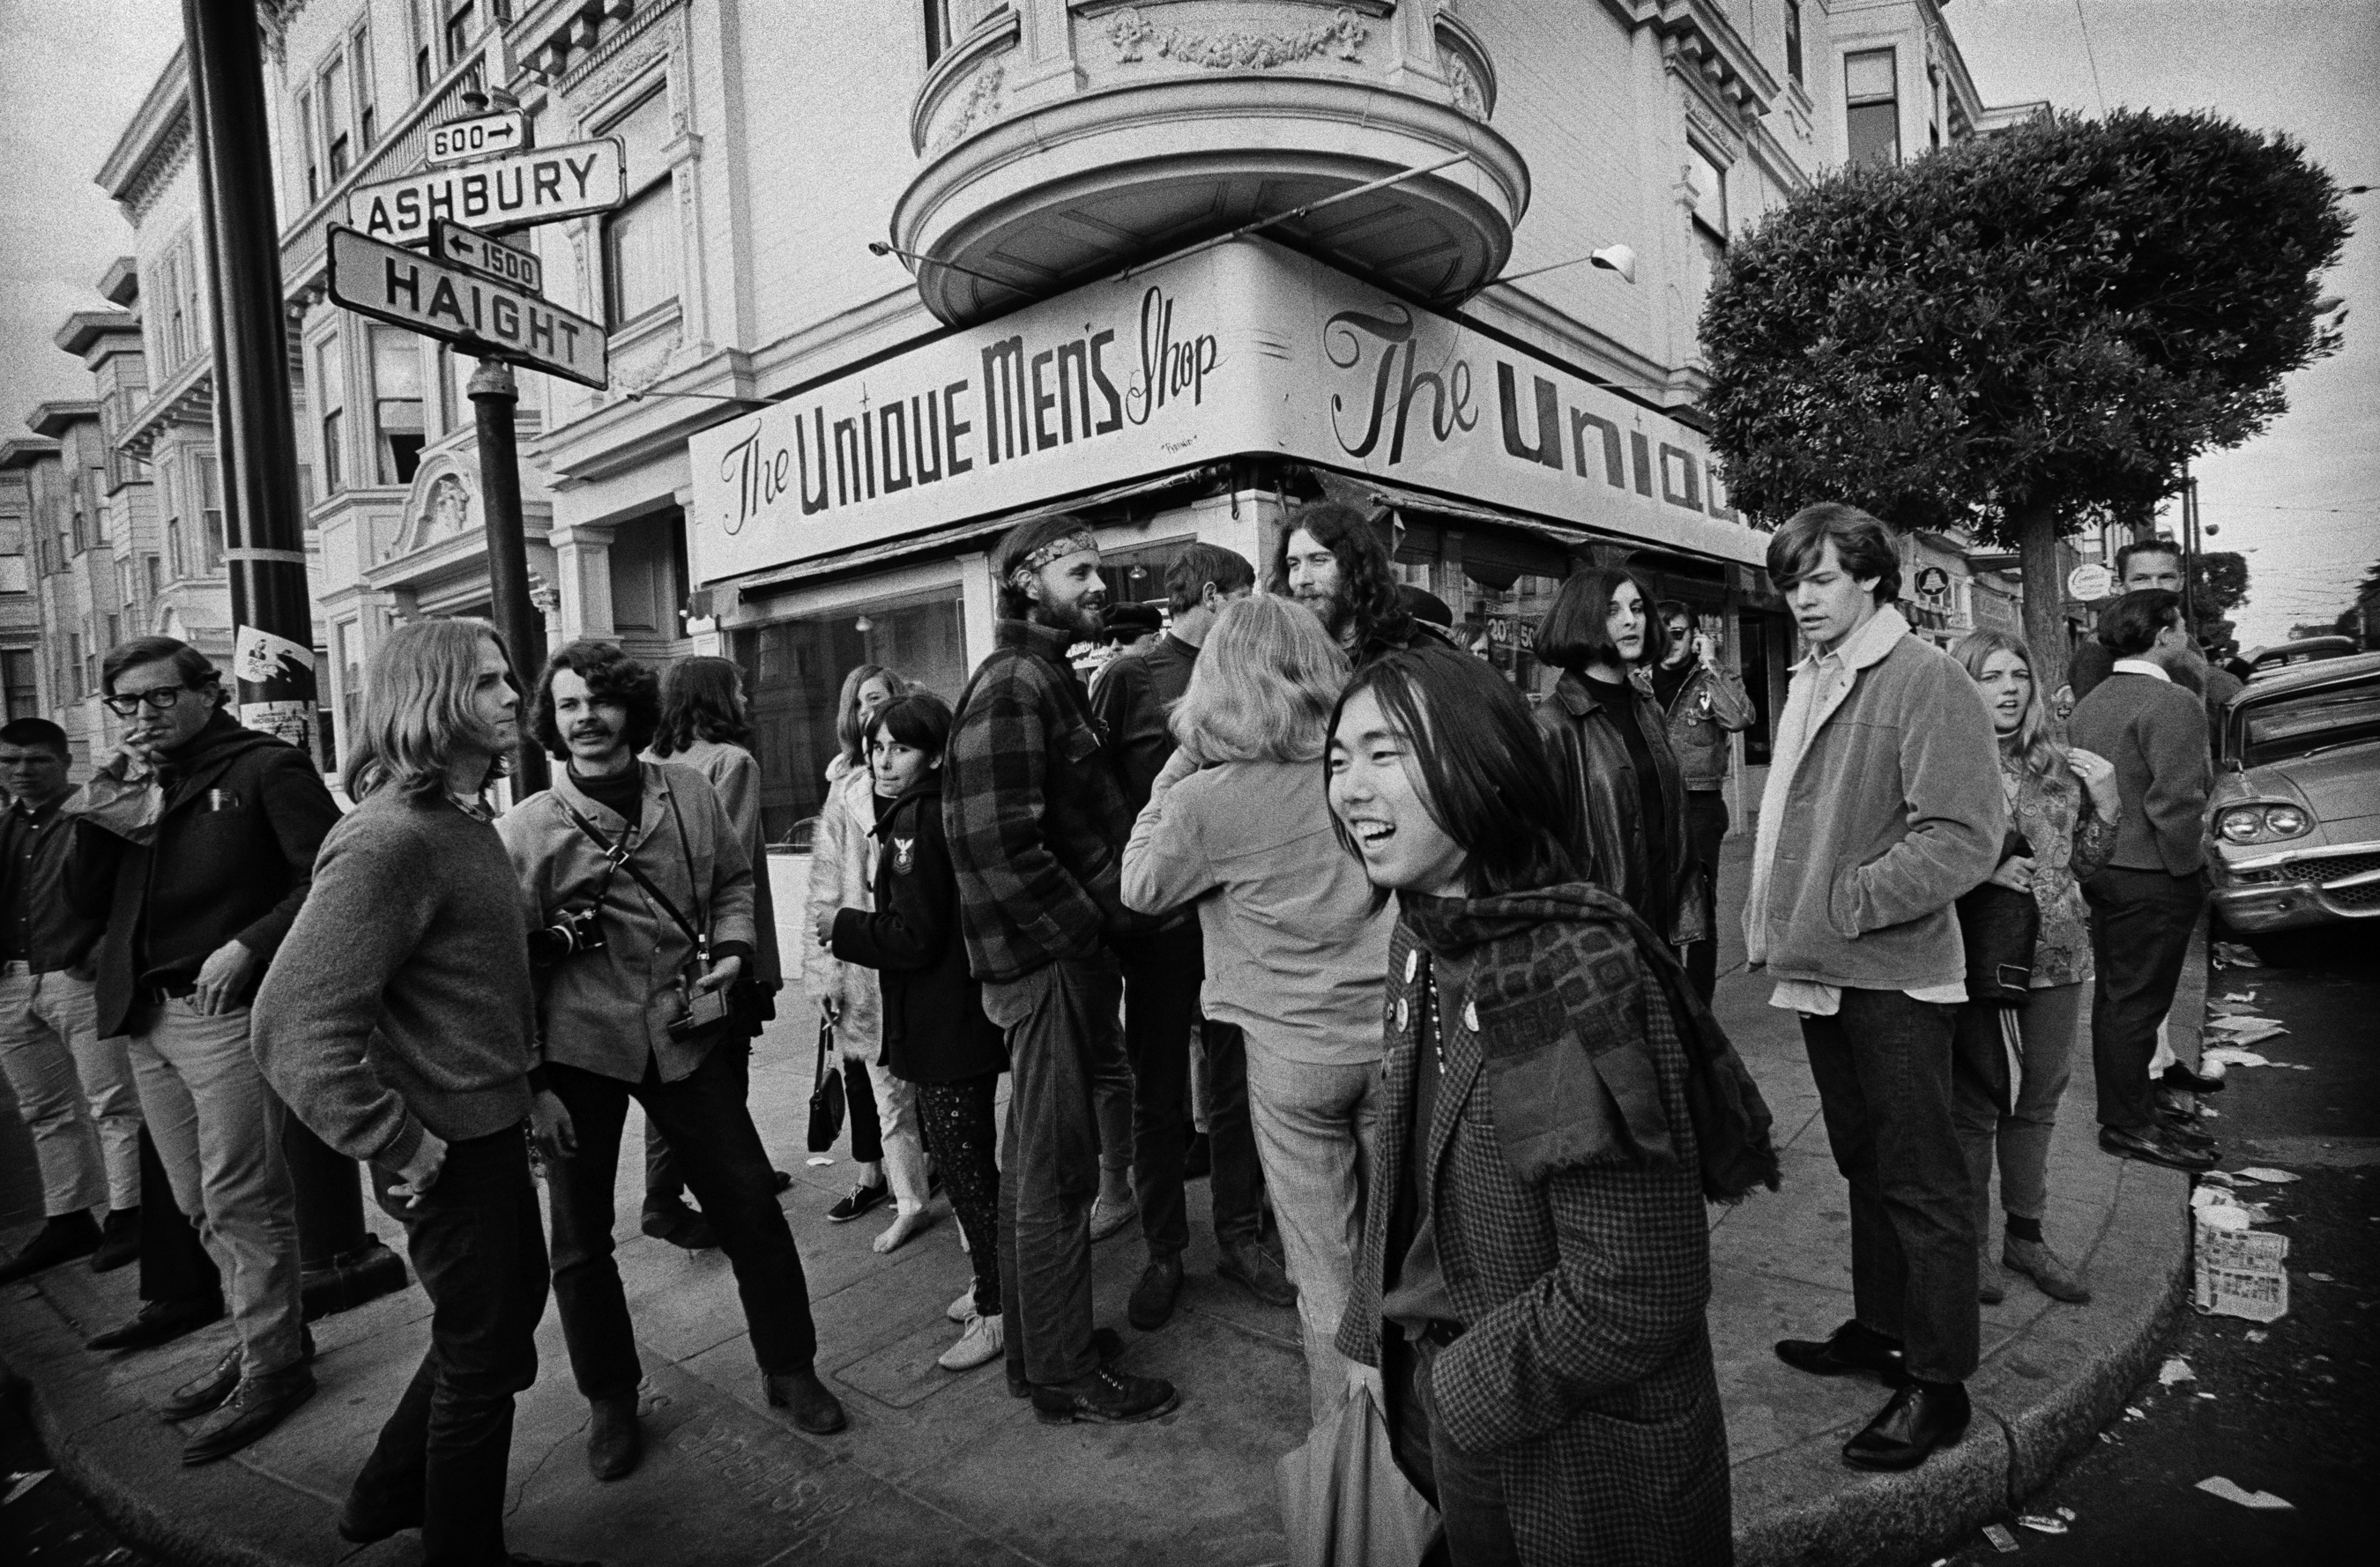 A crowd at the corner of Haight and Ashbury Streets